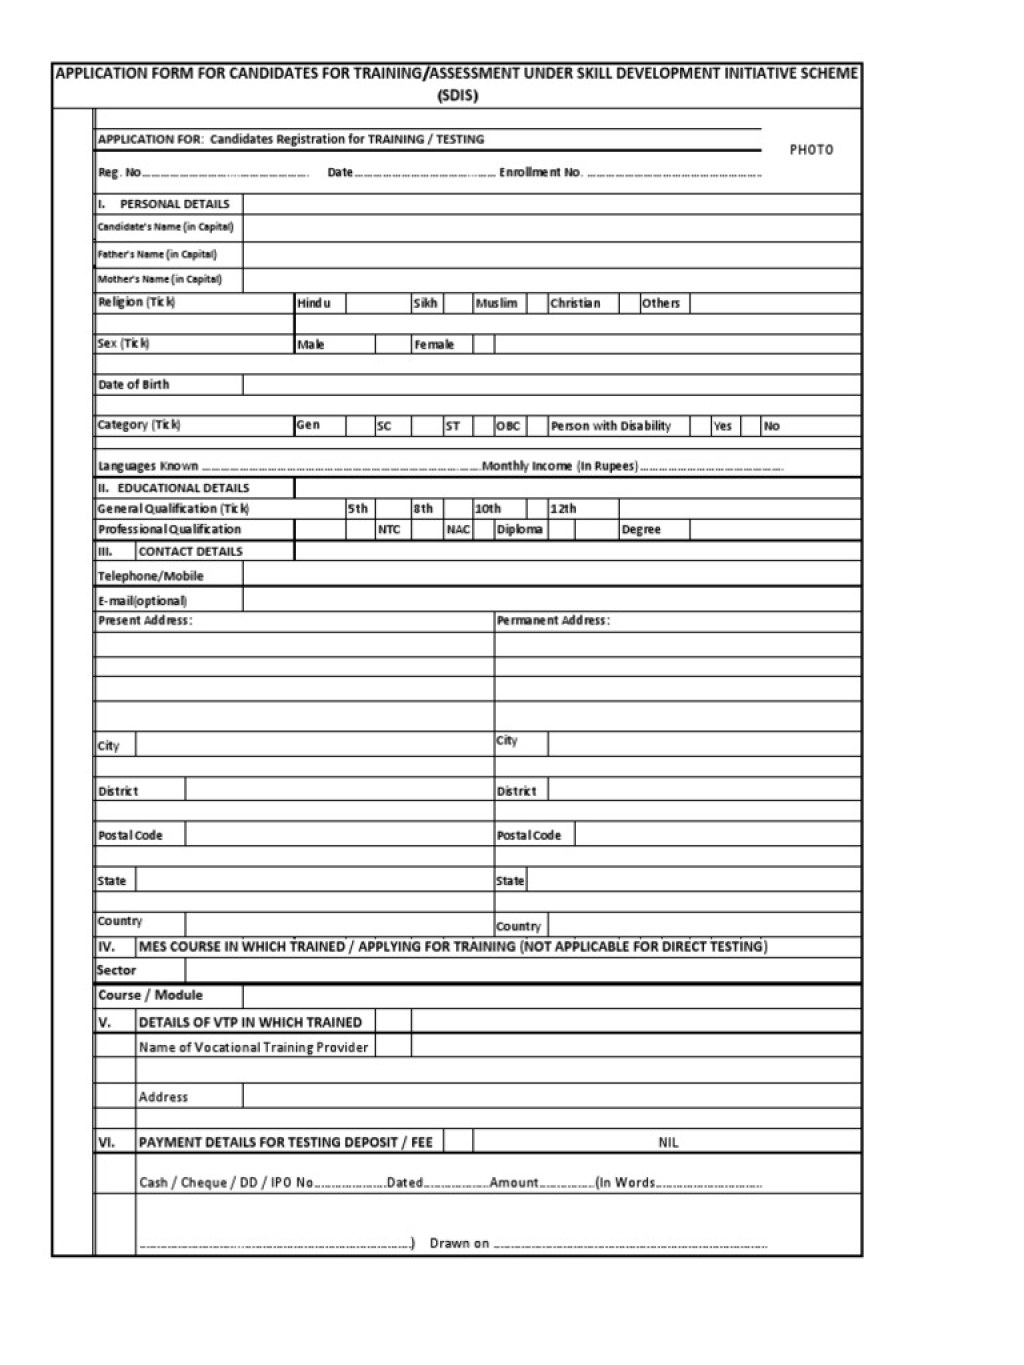 Picture of: Photo: Application Form For Candidates For Training/Assessment